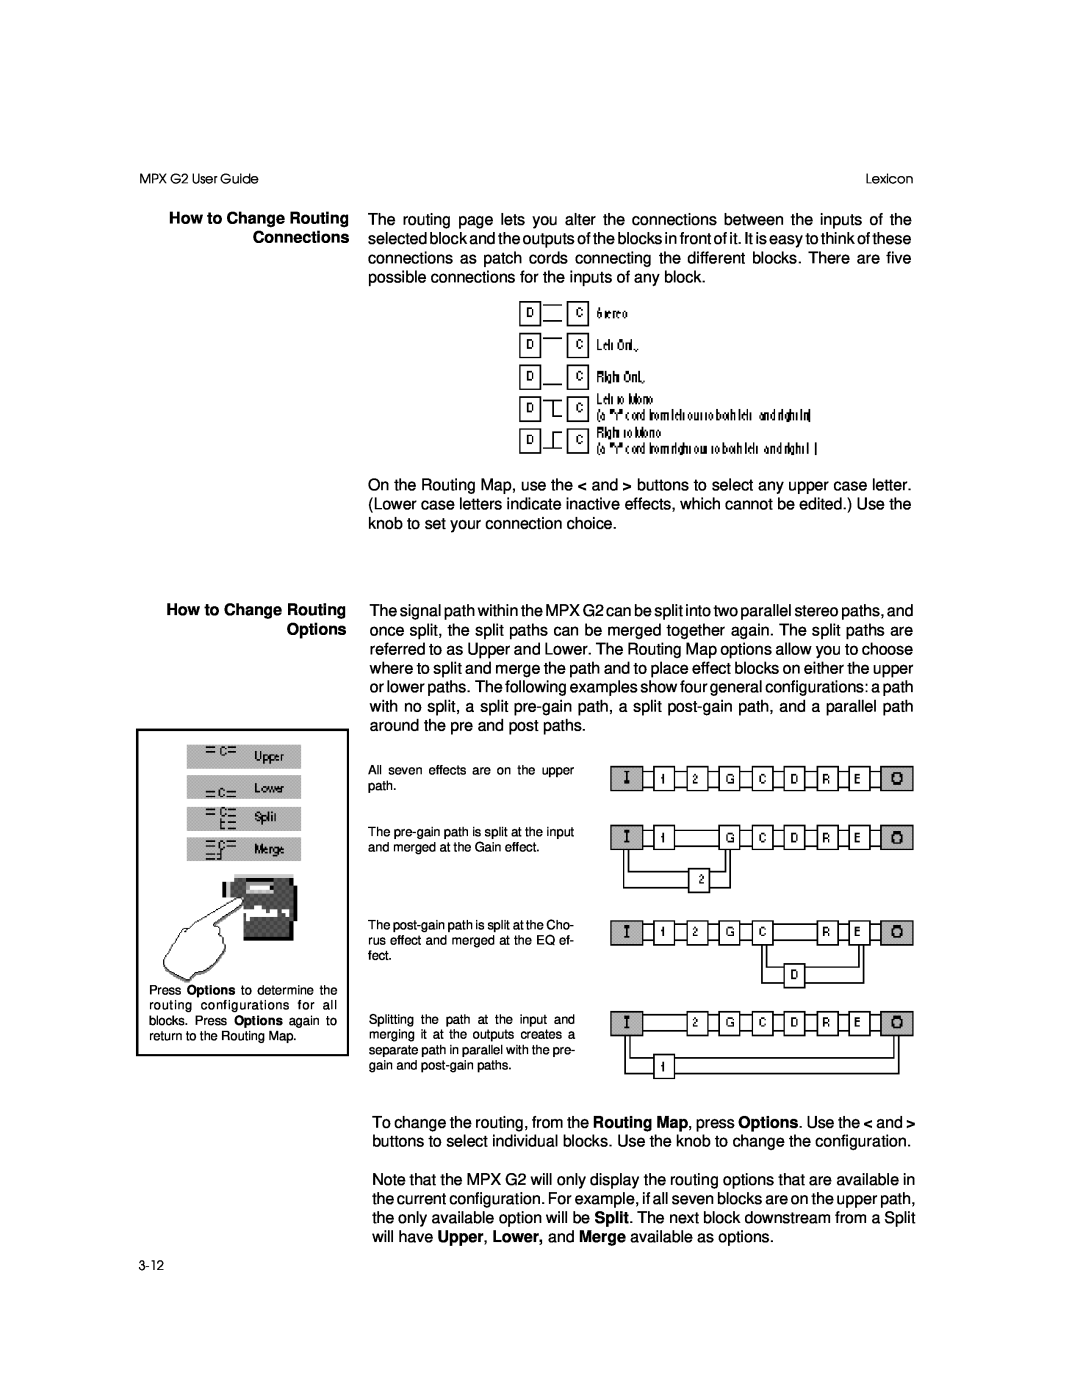 Lexicon MPX G2 manual How to Change Routing Connections, How to Change Routing Options 